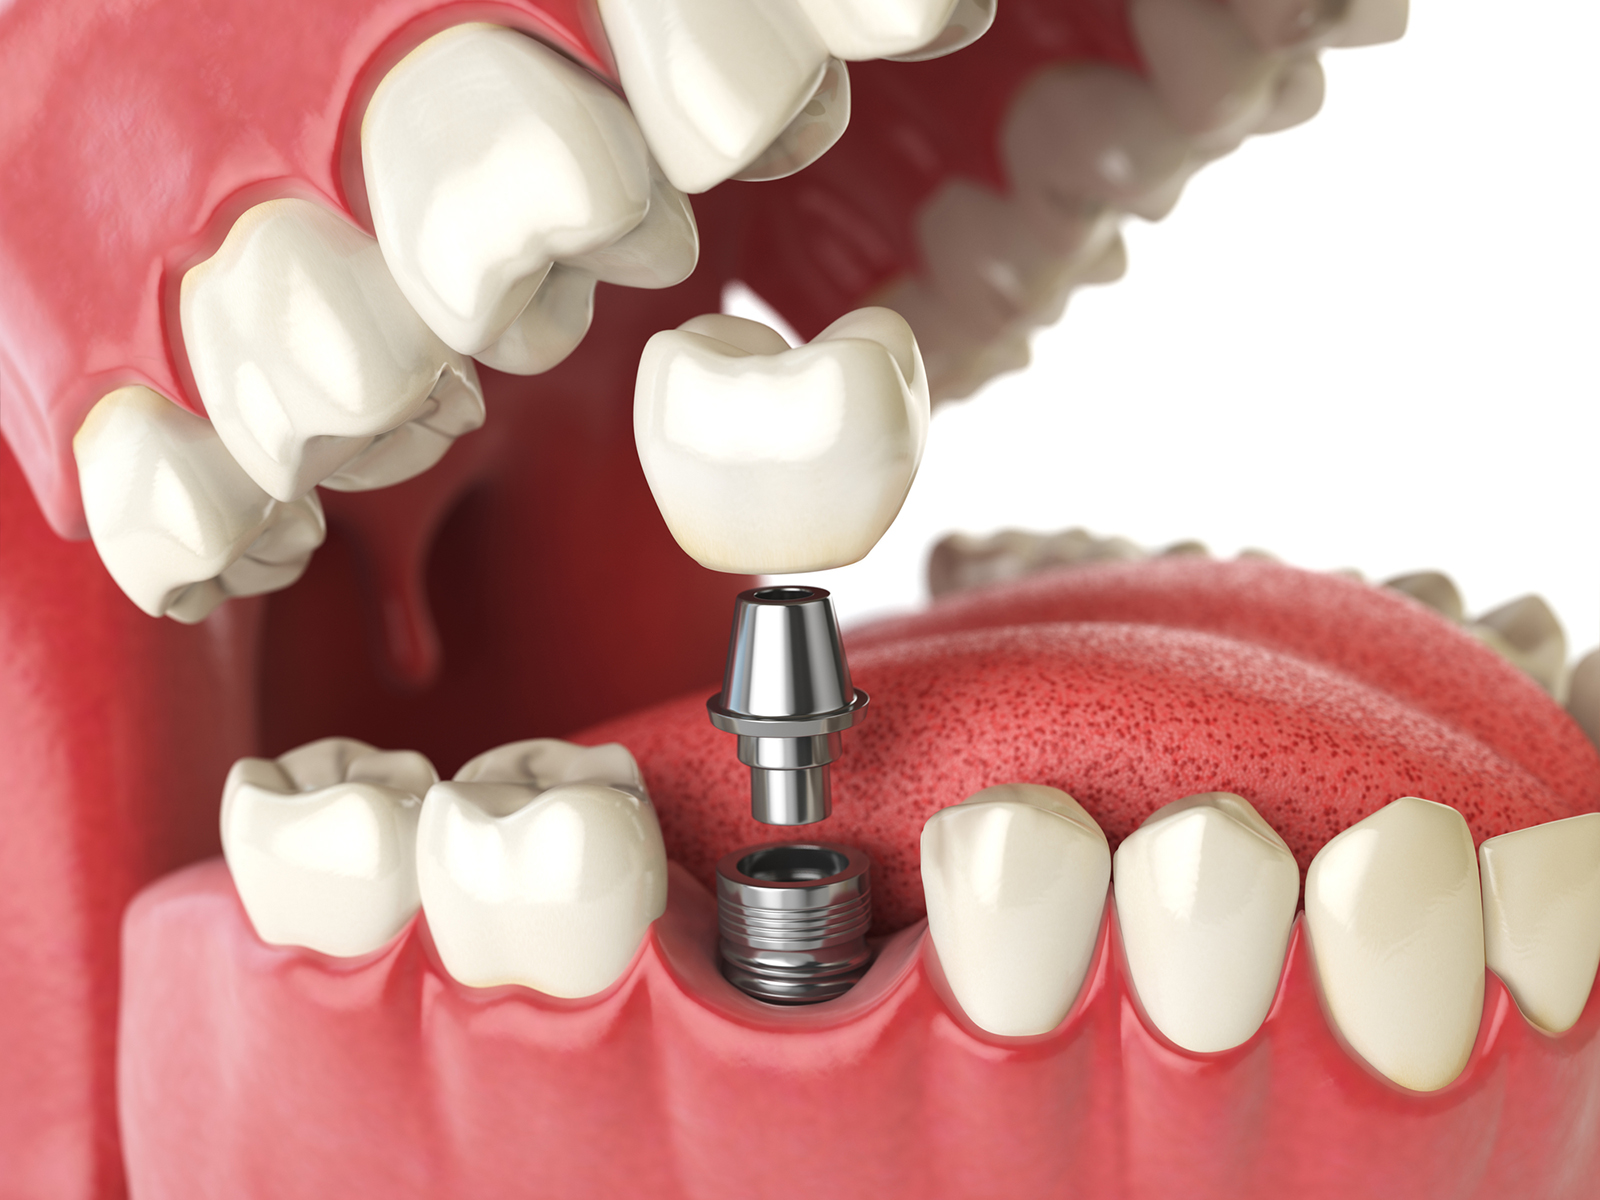 Dental Implants: What’s The Recovery Time?